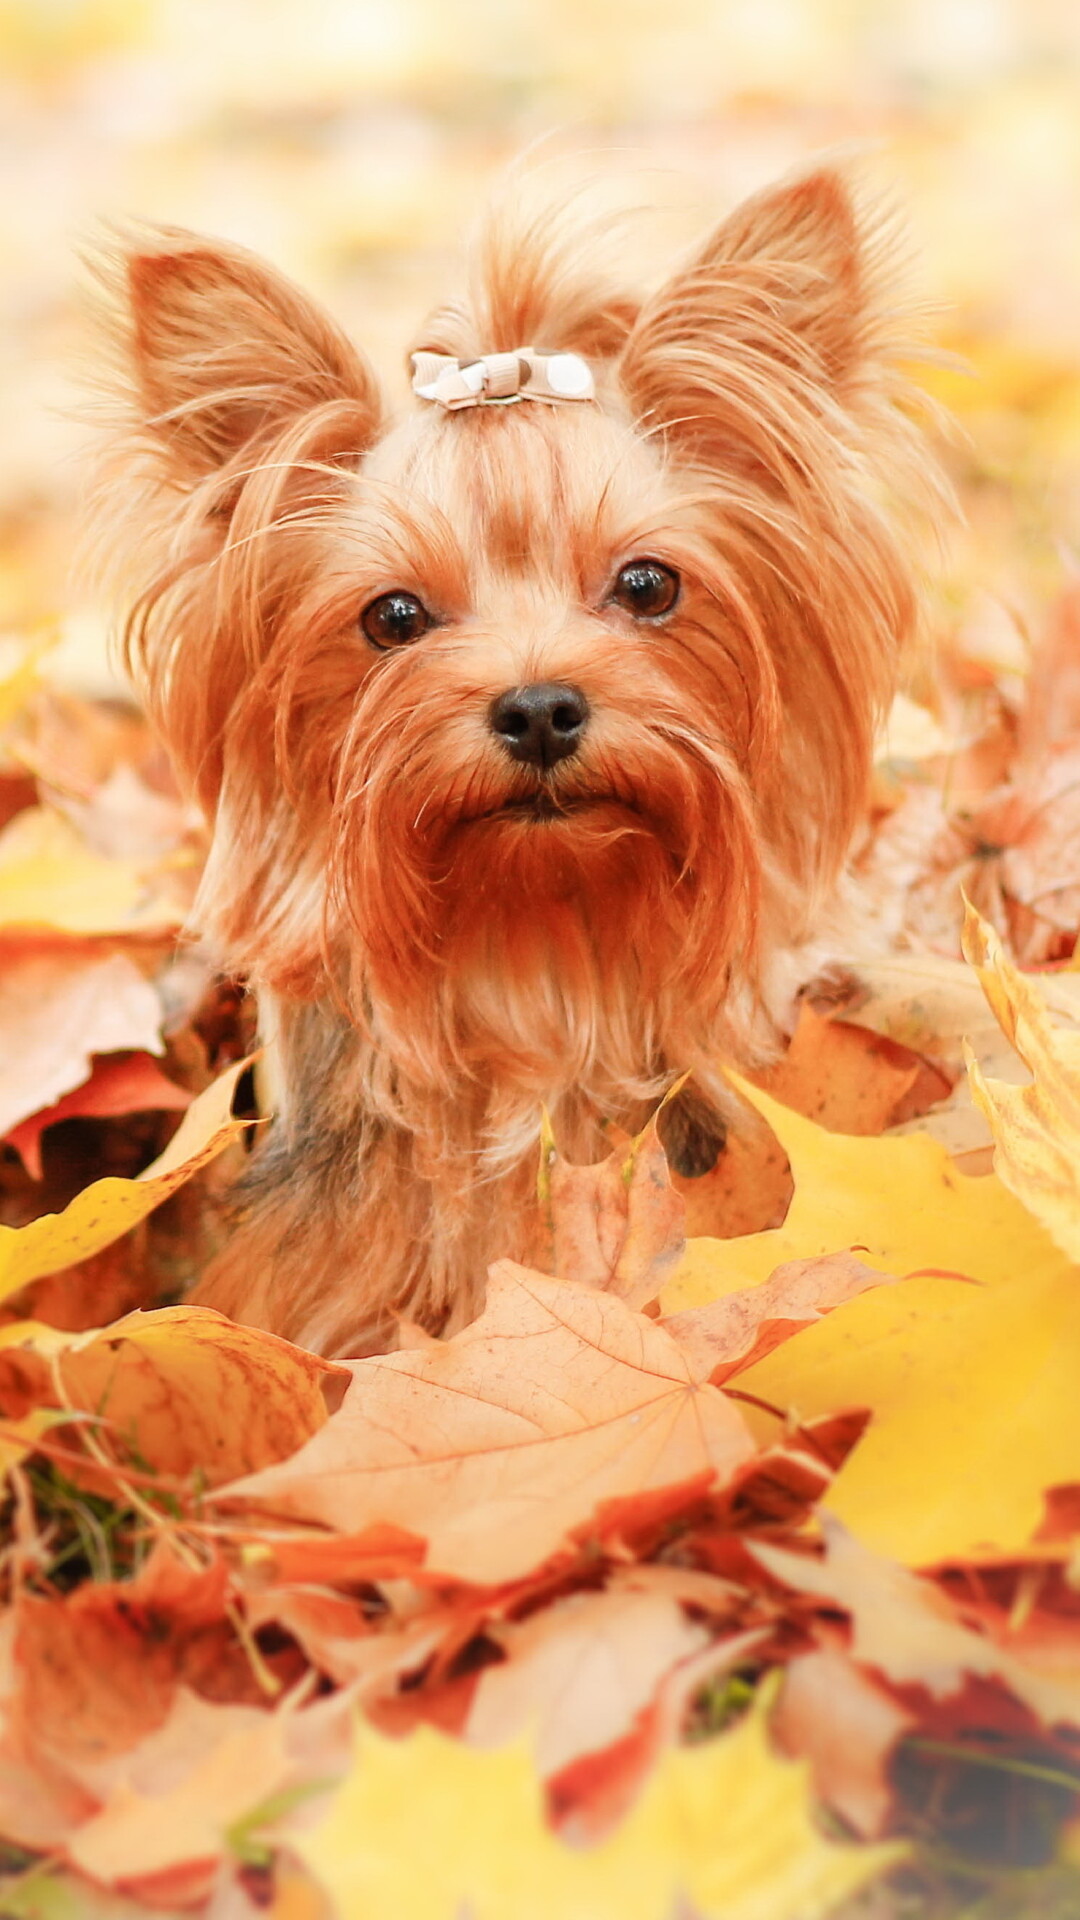 Yorkshire Terrier: Animal, The breed never getting larger than 7 pounds. 1080x1920 Full HD Wallpaper.